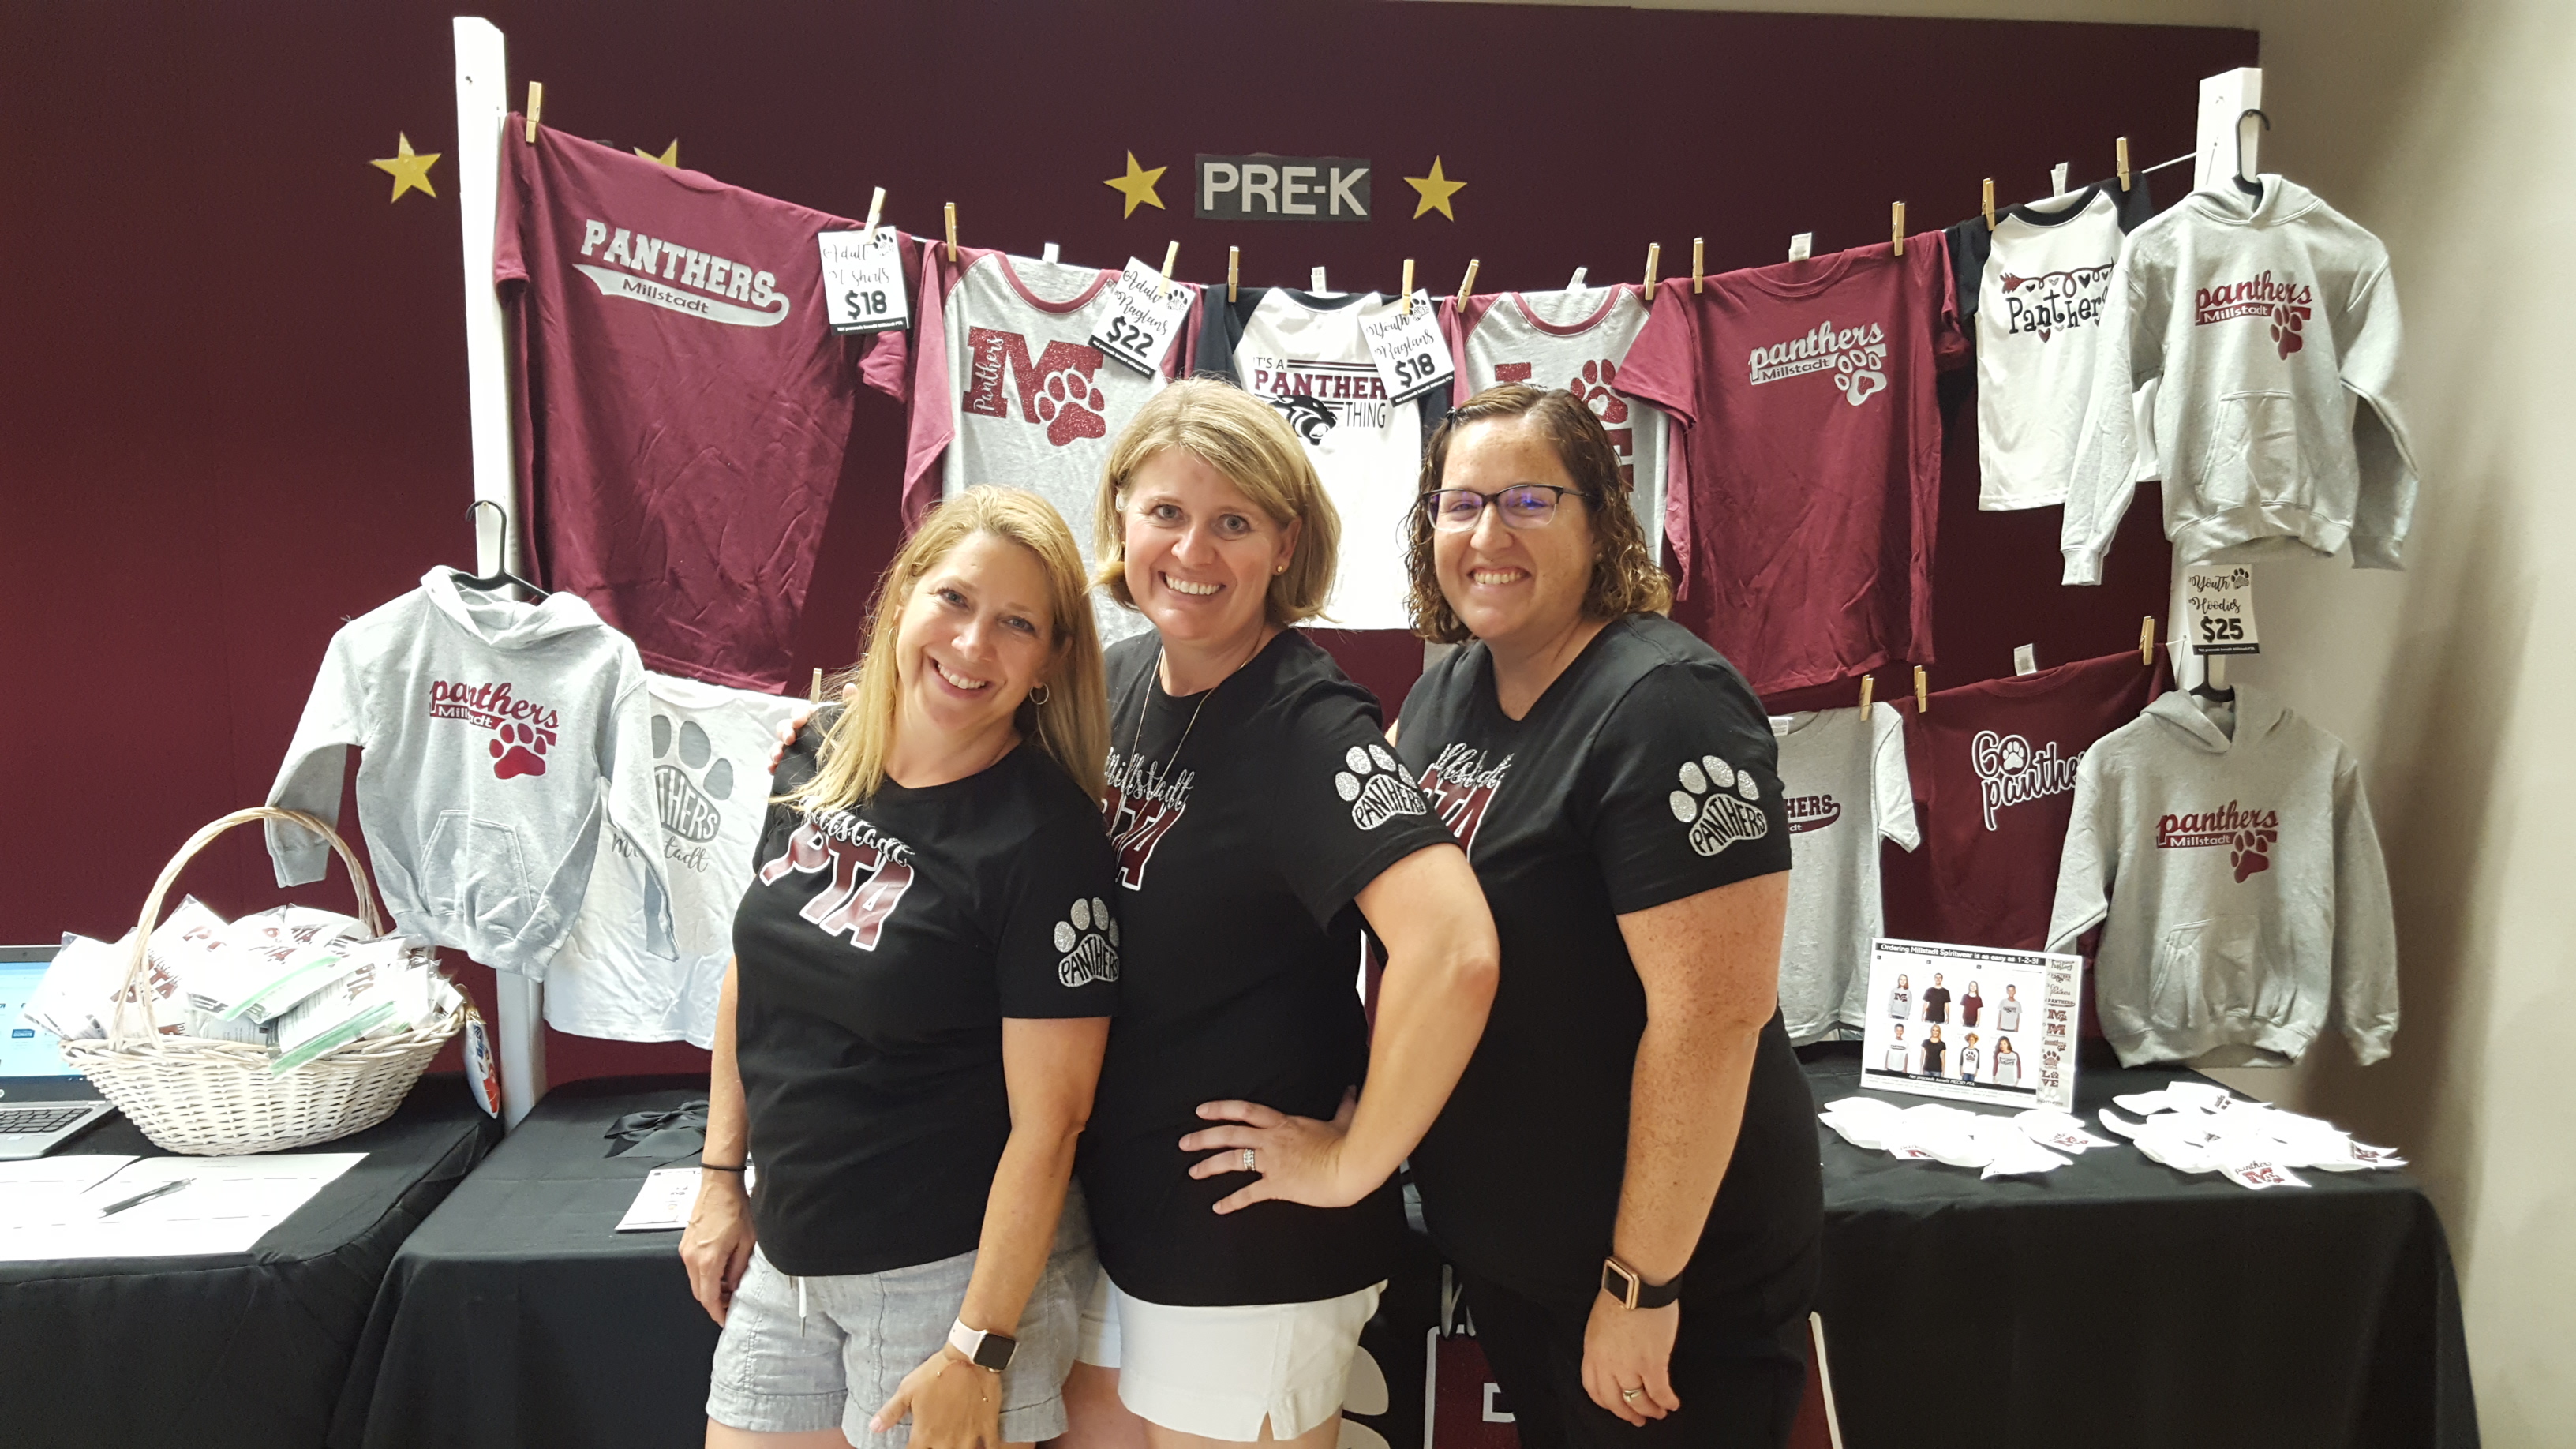 Three women, members of the PTA group, posing in front of their banner with their logo and a couple of shirts hanging at the back as part of their merchandise.